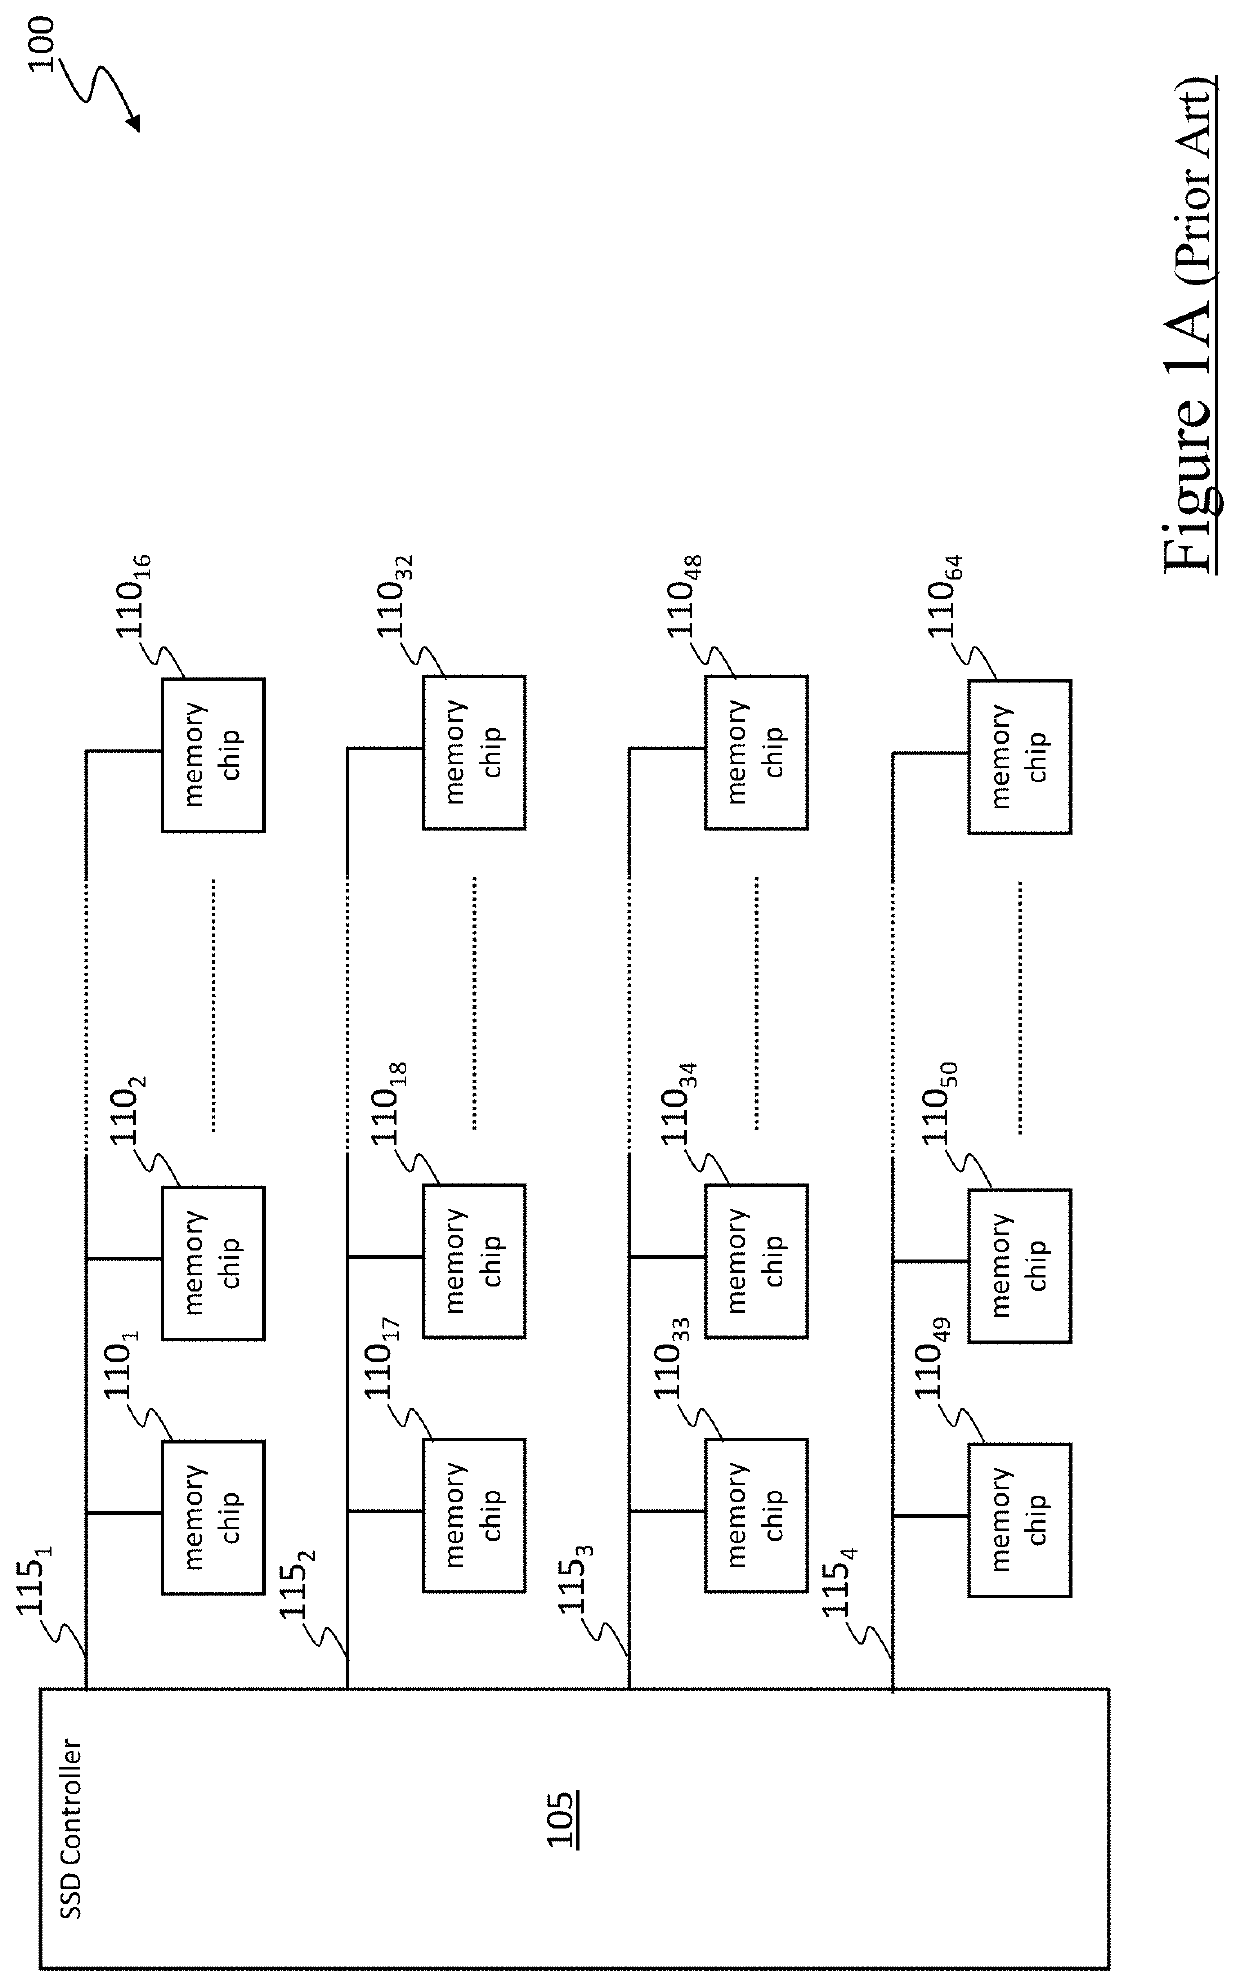 Solid state drive implementing polar encoding and successive cancellation list decoding